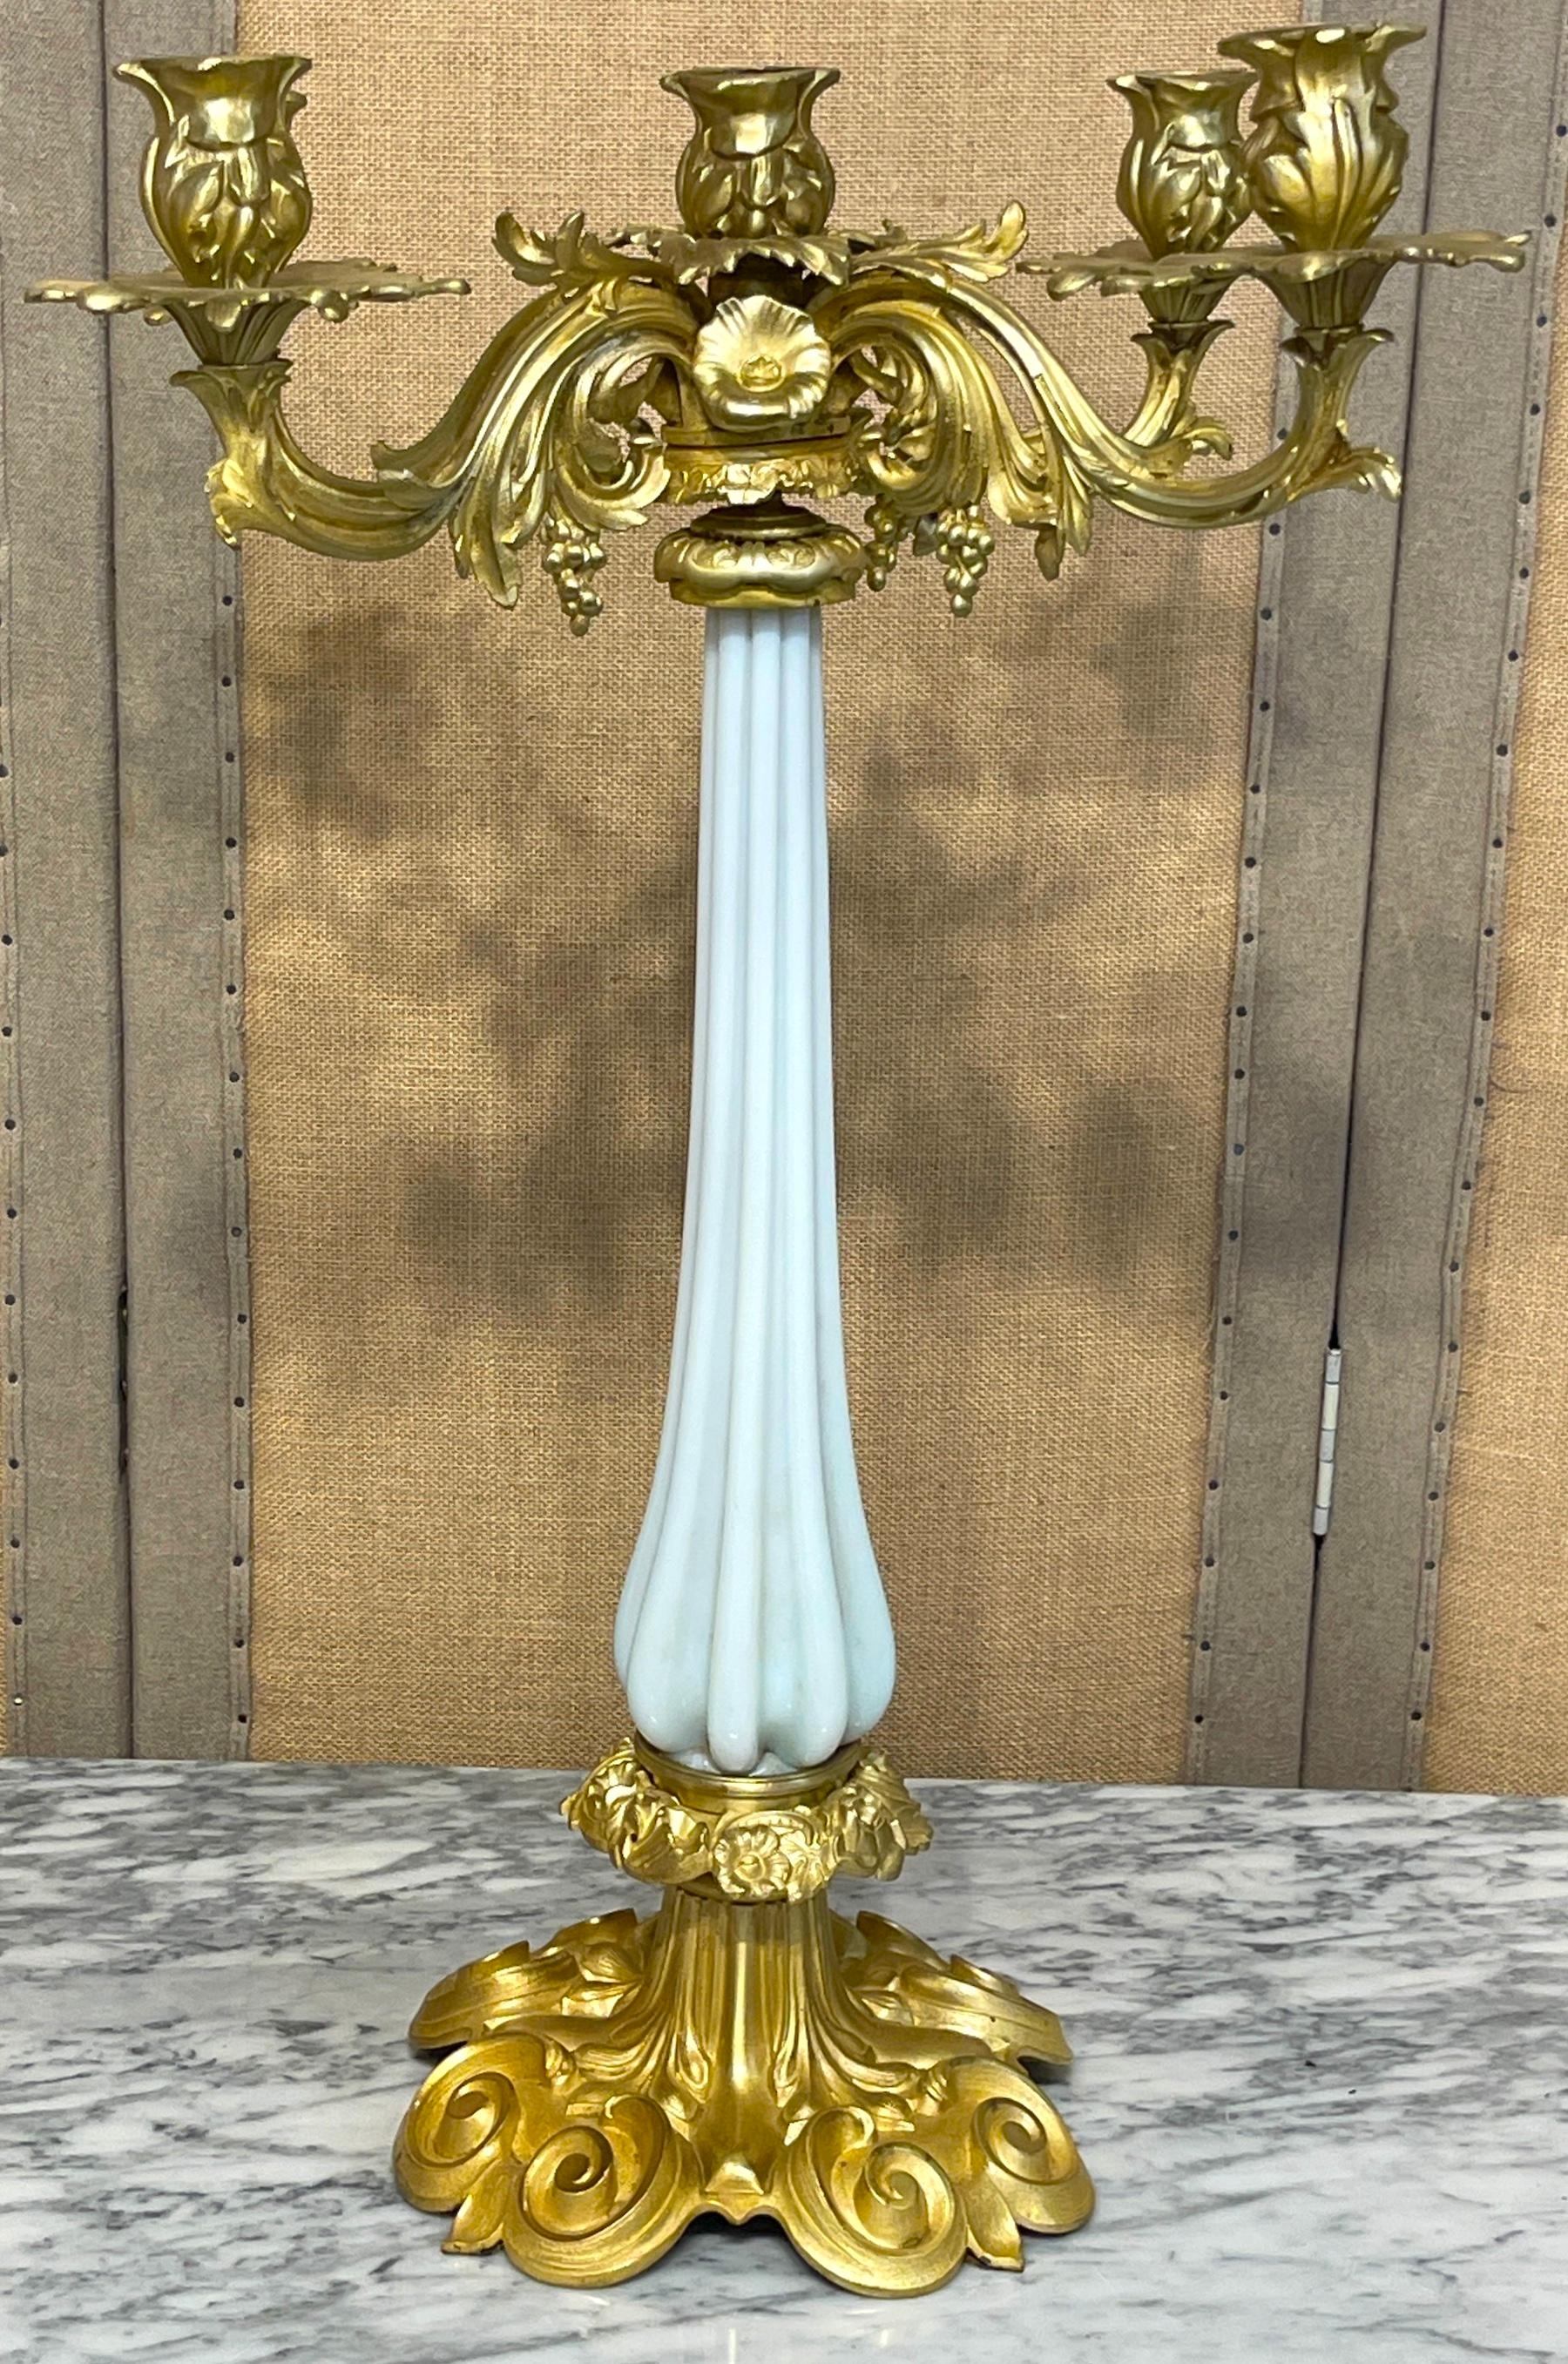 Pair of 19th Century French Ormolu & Opaline Palais Royal Candelabra In Good Condition For Sale In West Palm Beach, FL